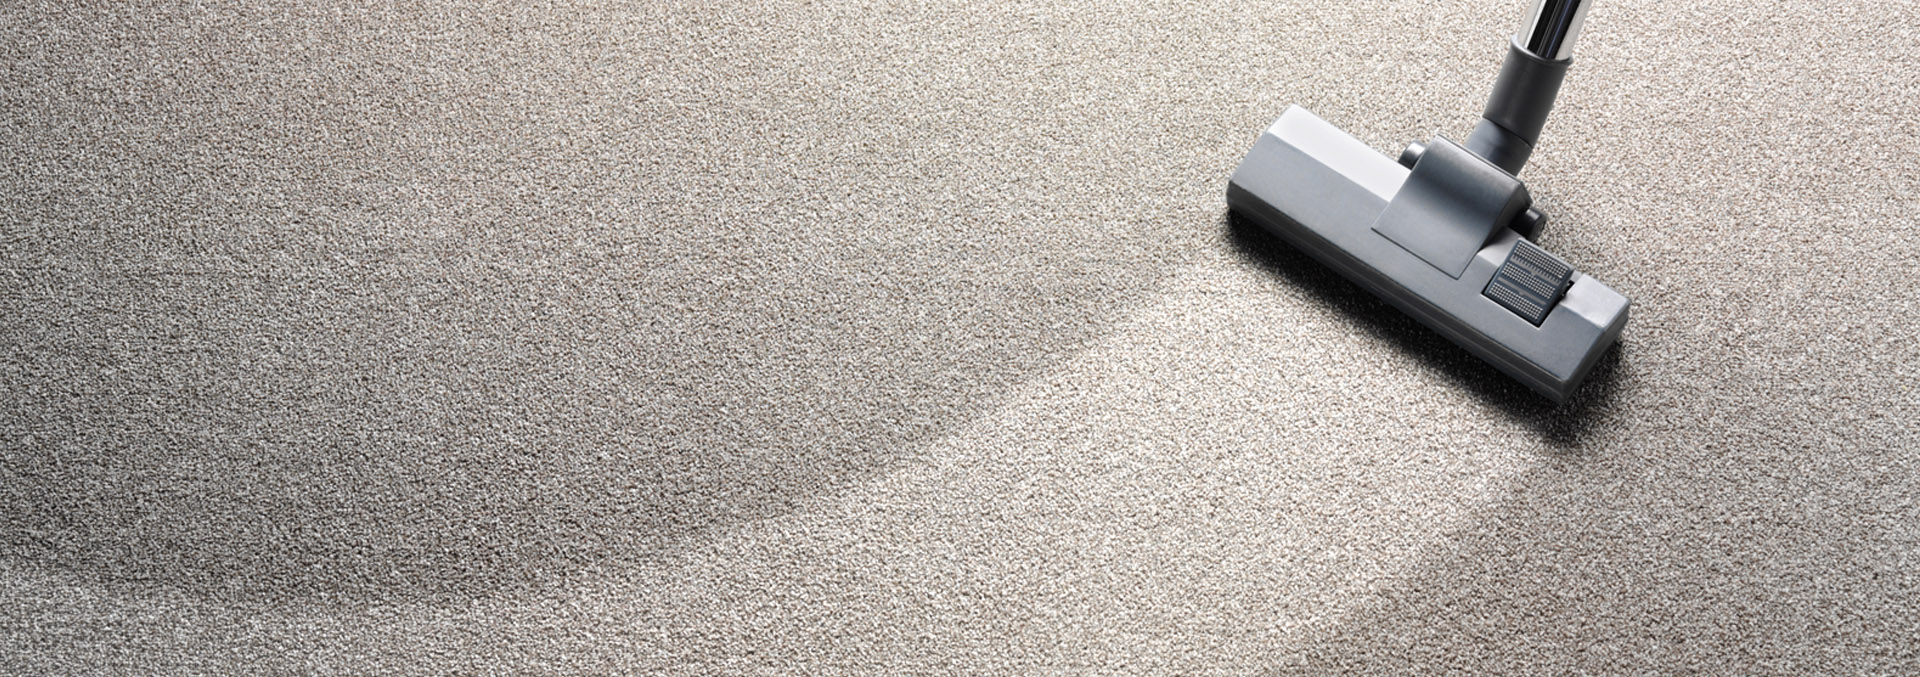 Keeping Carpet Clean Is Affordable now in Adelaide